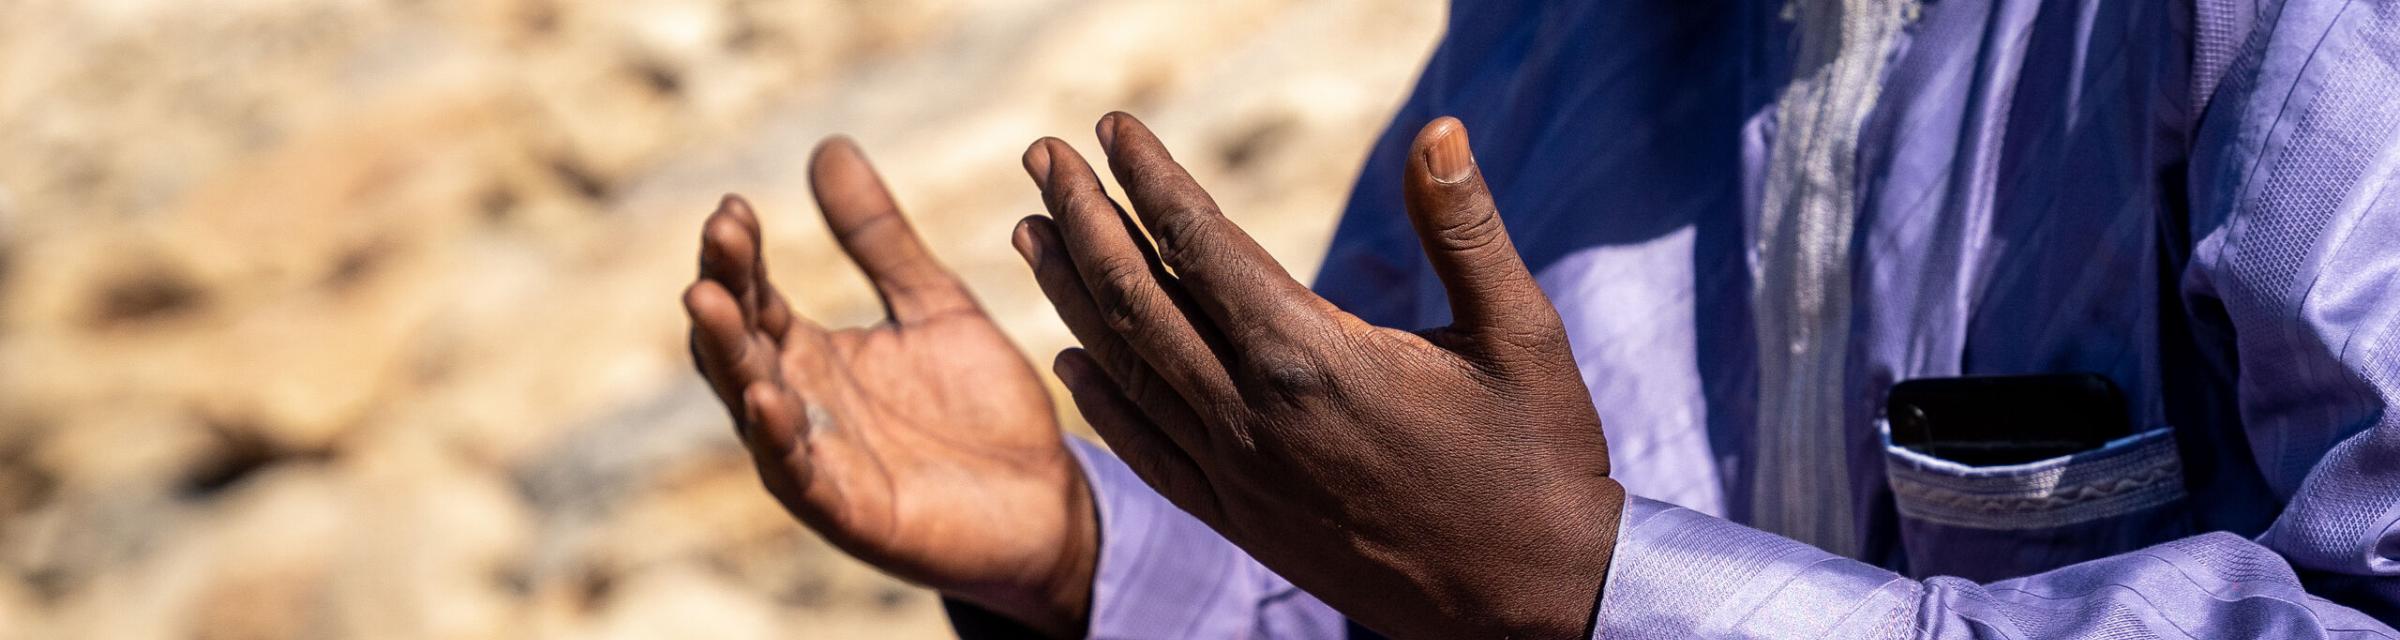 A man from the Sahel prays for his country. Photo by RJ Rempel.